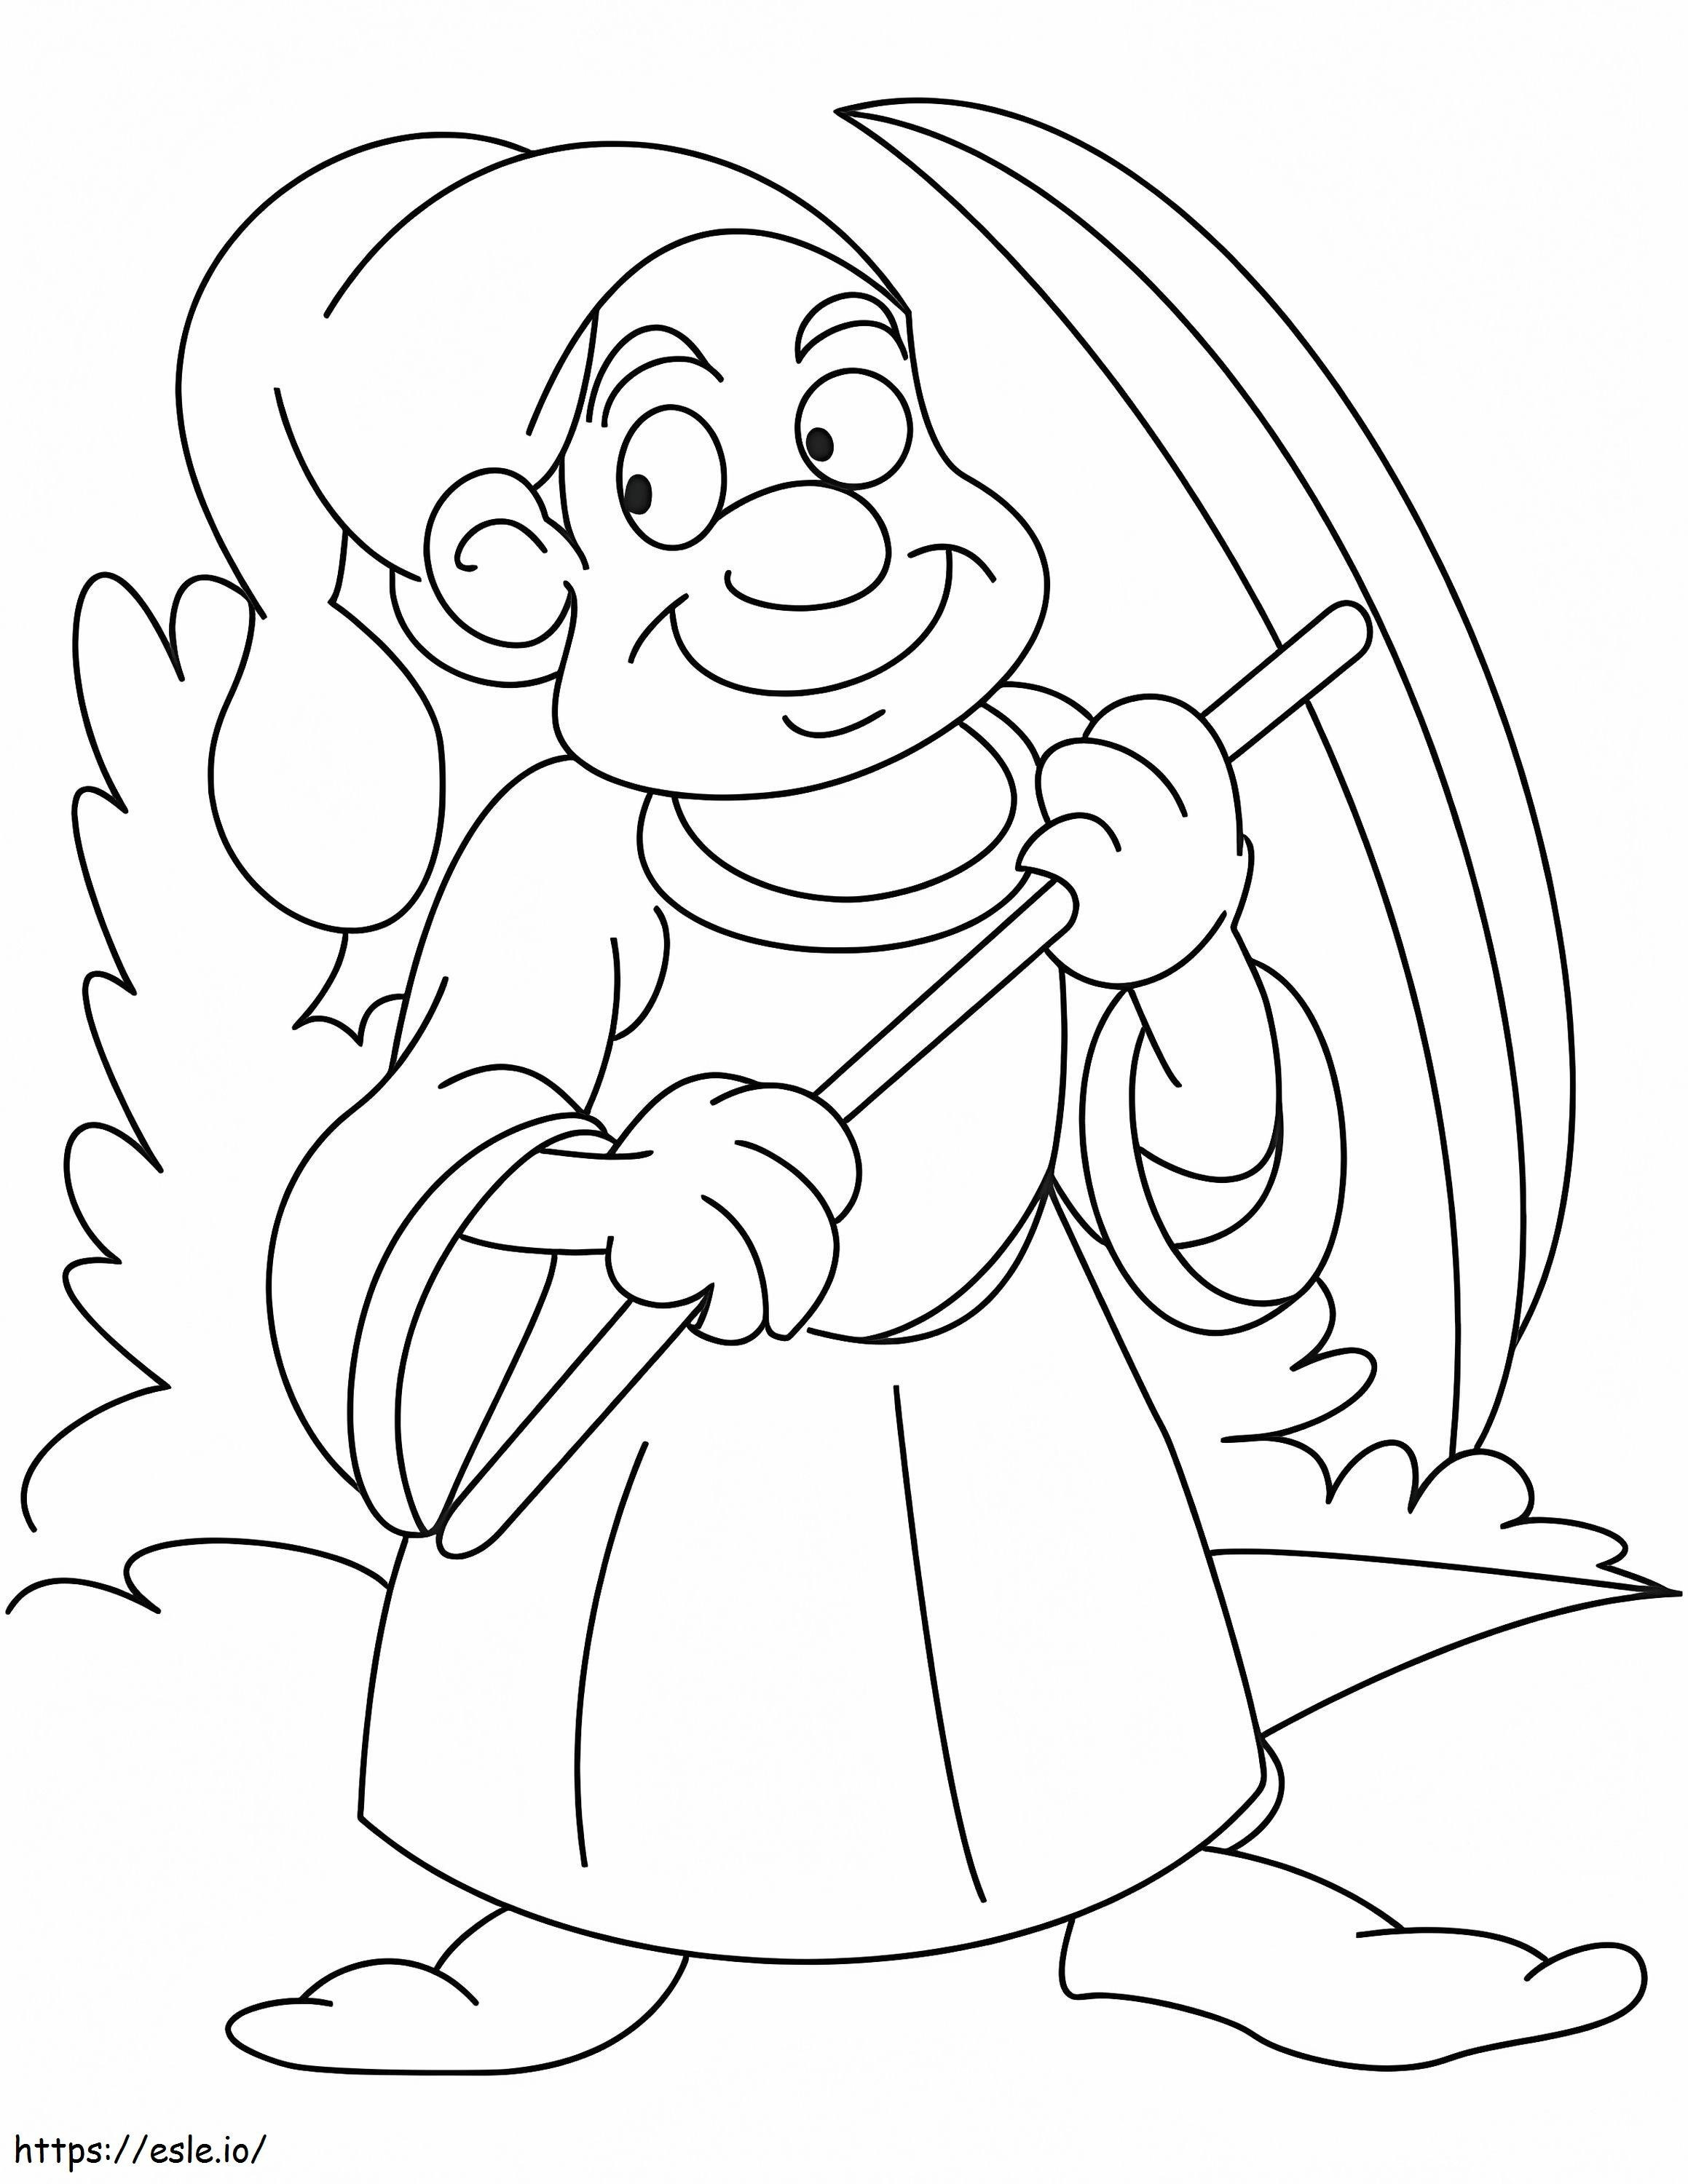 Dwarf To Print coloring page